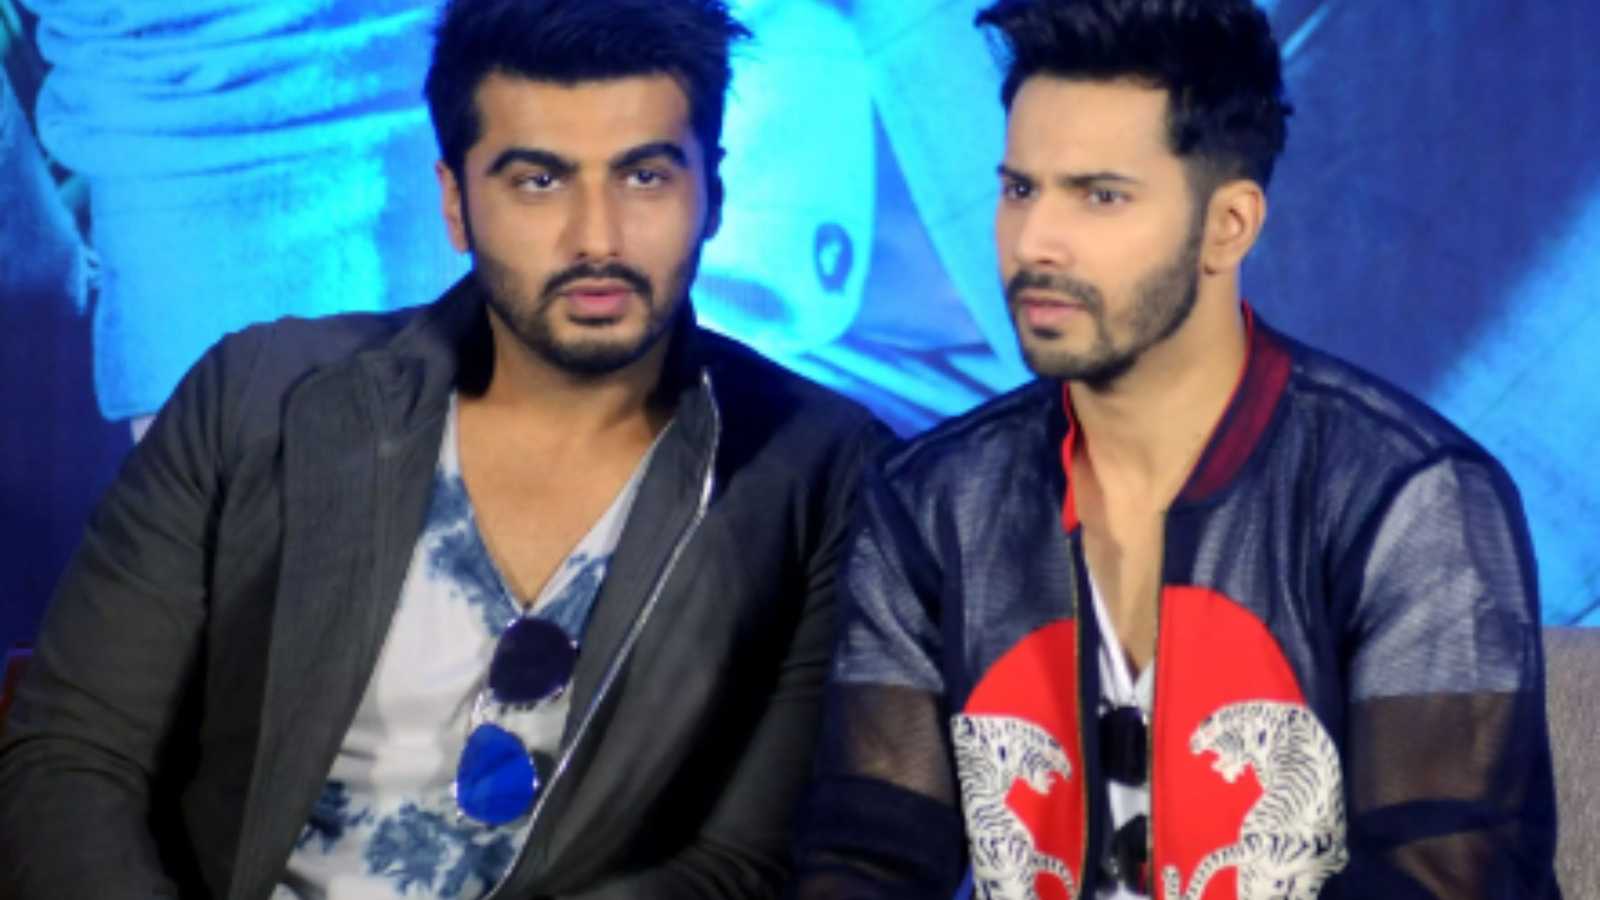 Did Arjun Kapoor take a dig at Varun Dhawan over latter's Koffee With Karan 7 comments on him?